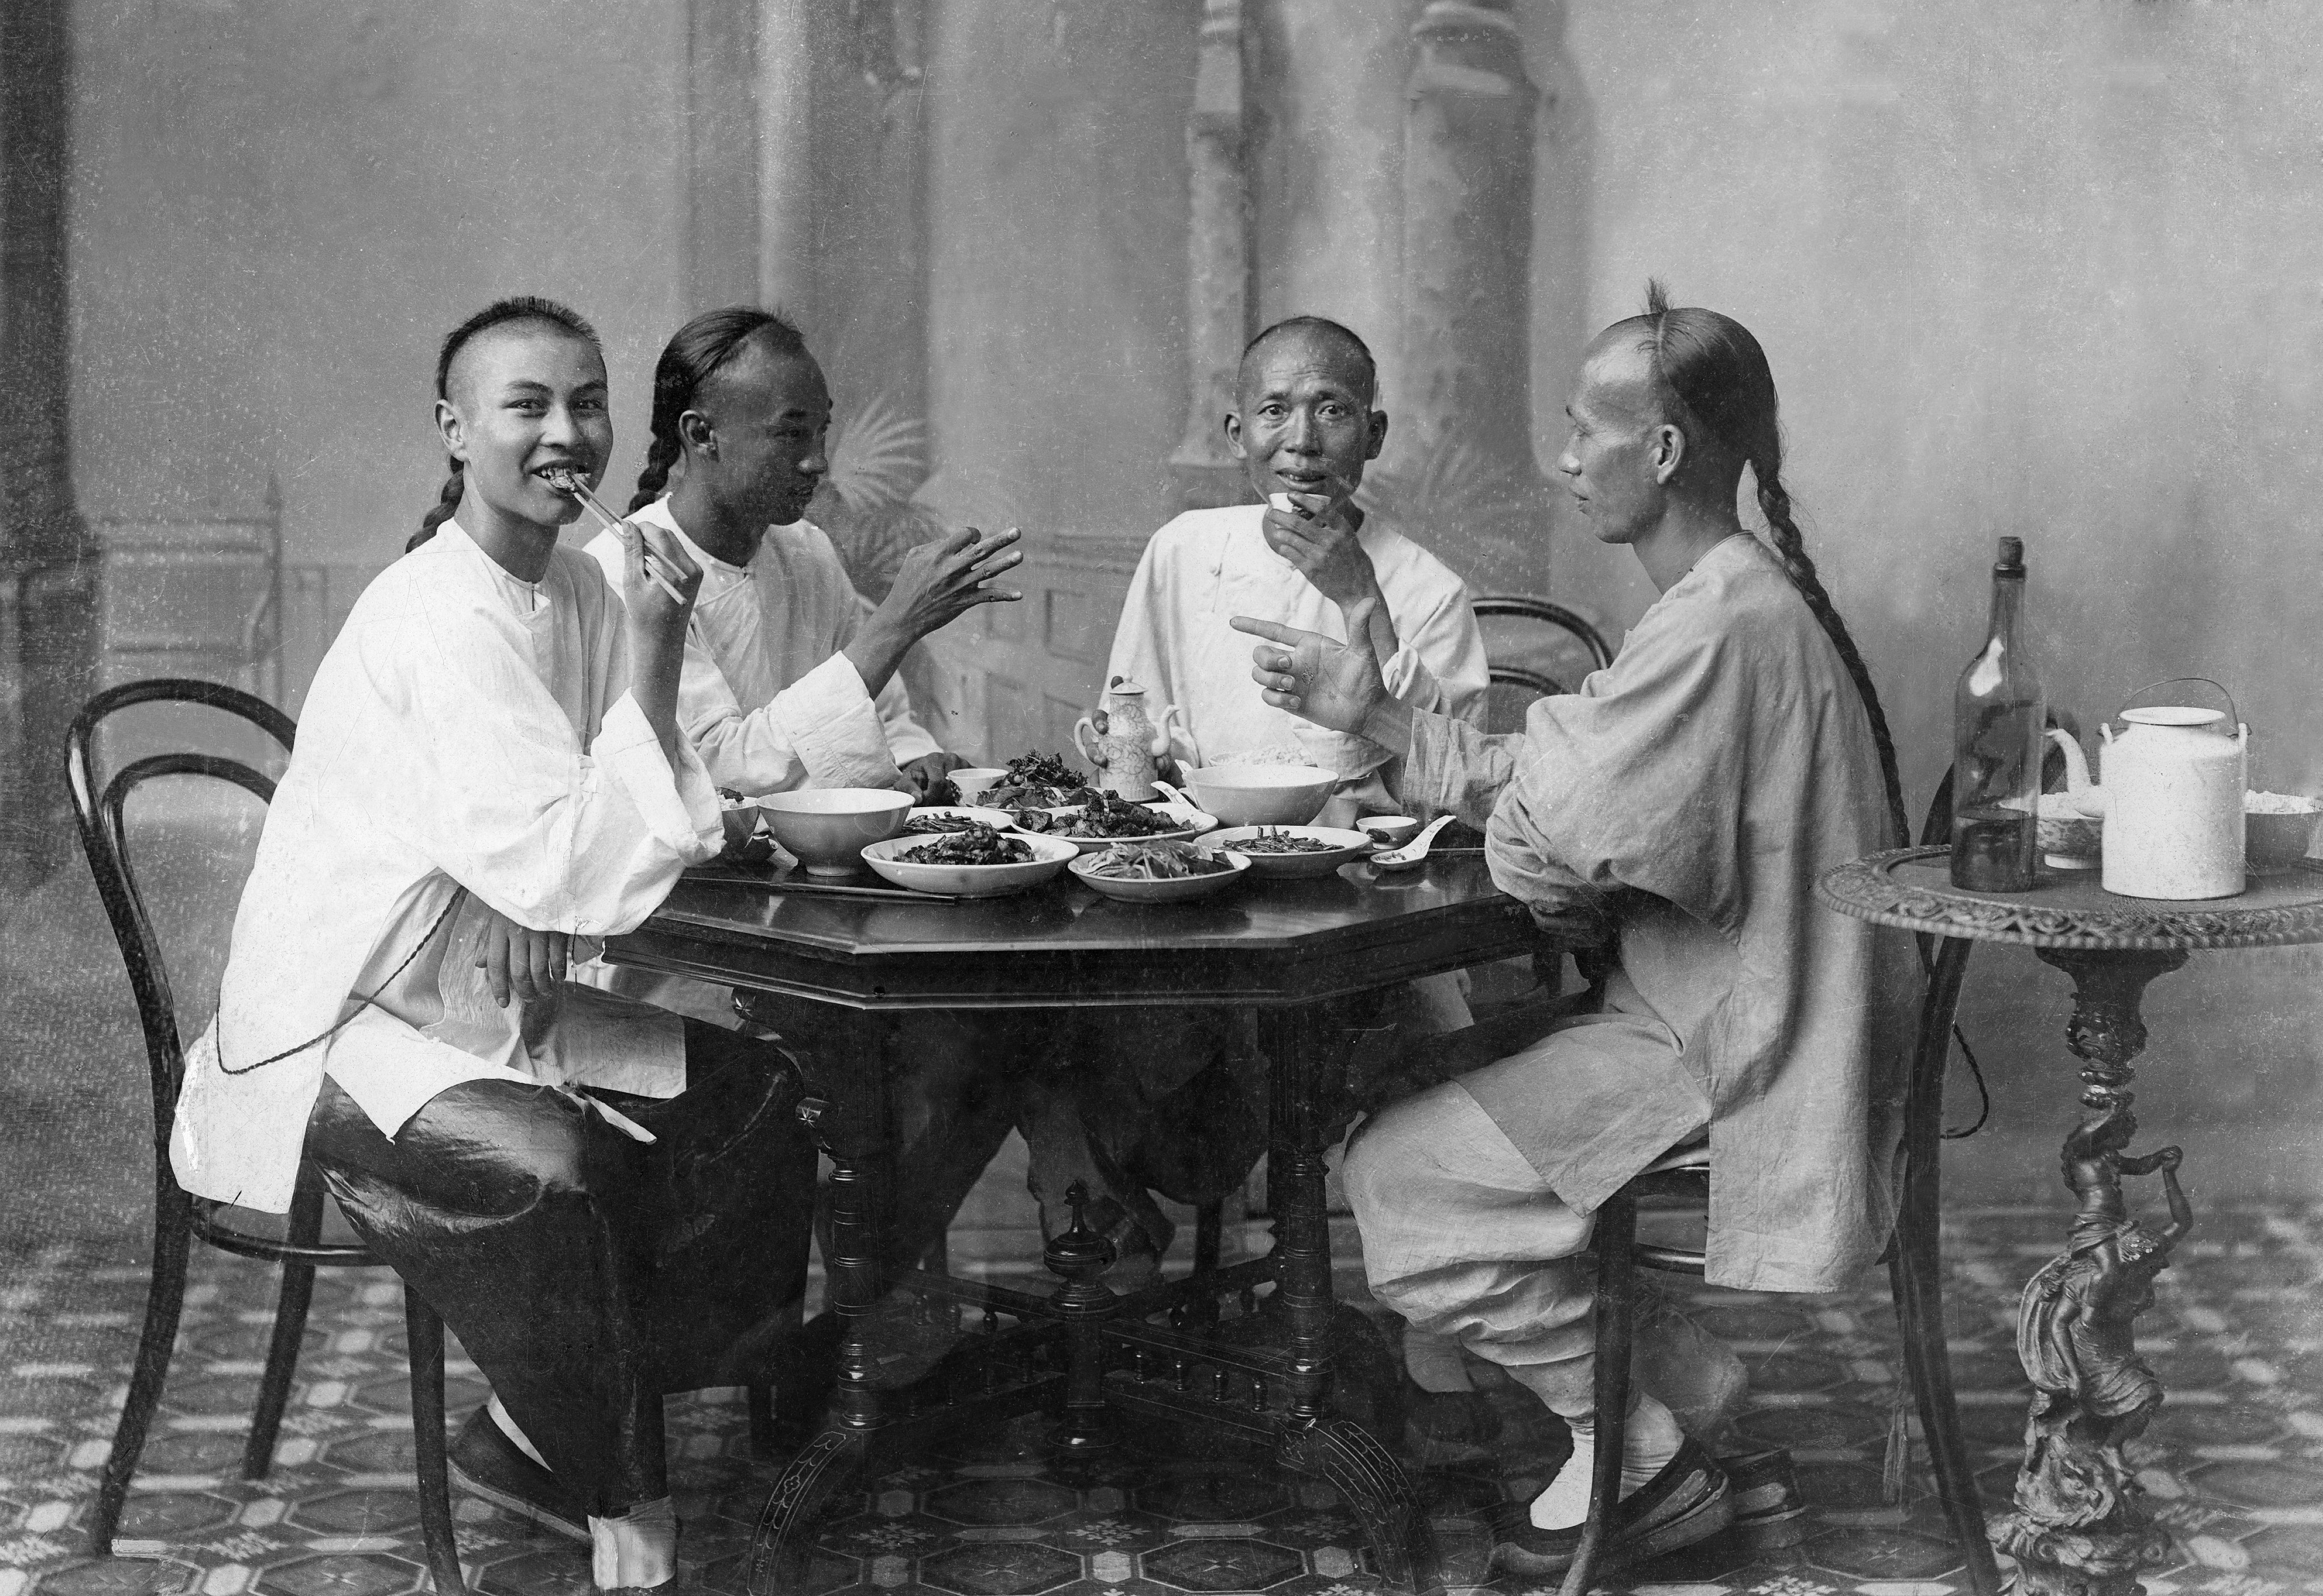 Chinese men wear the typical Manchu hairstyle, which required shaving parts of the head and wearing the remaining hair as a braid down the back, circa 1900. Picture: Getty Images